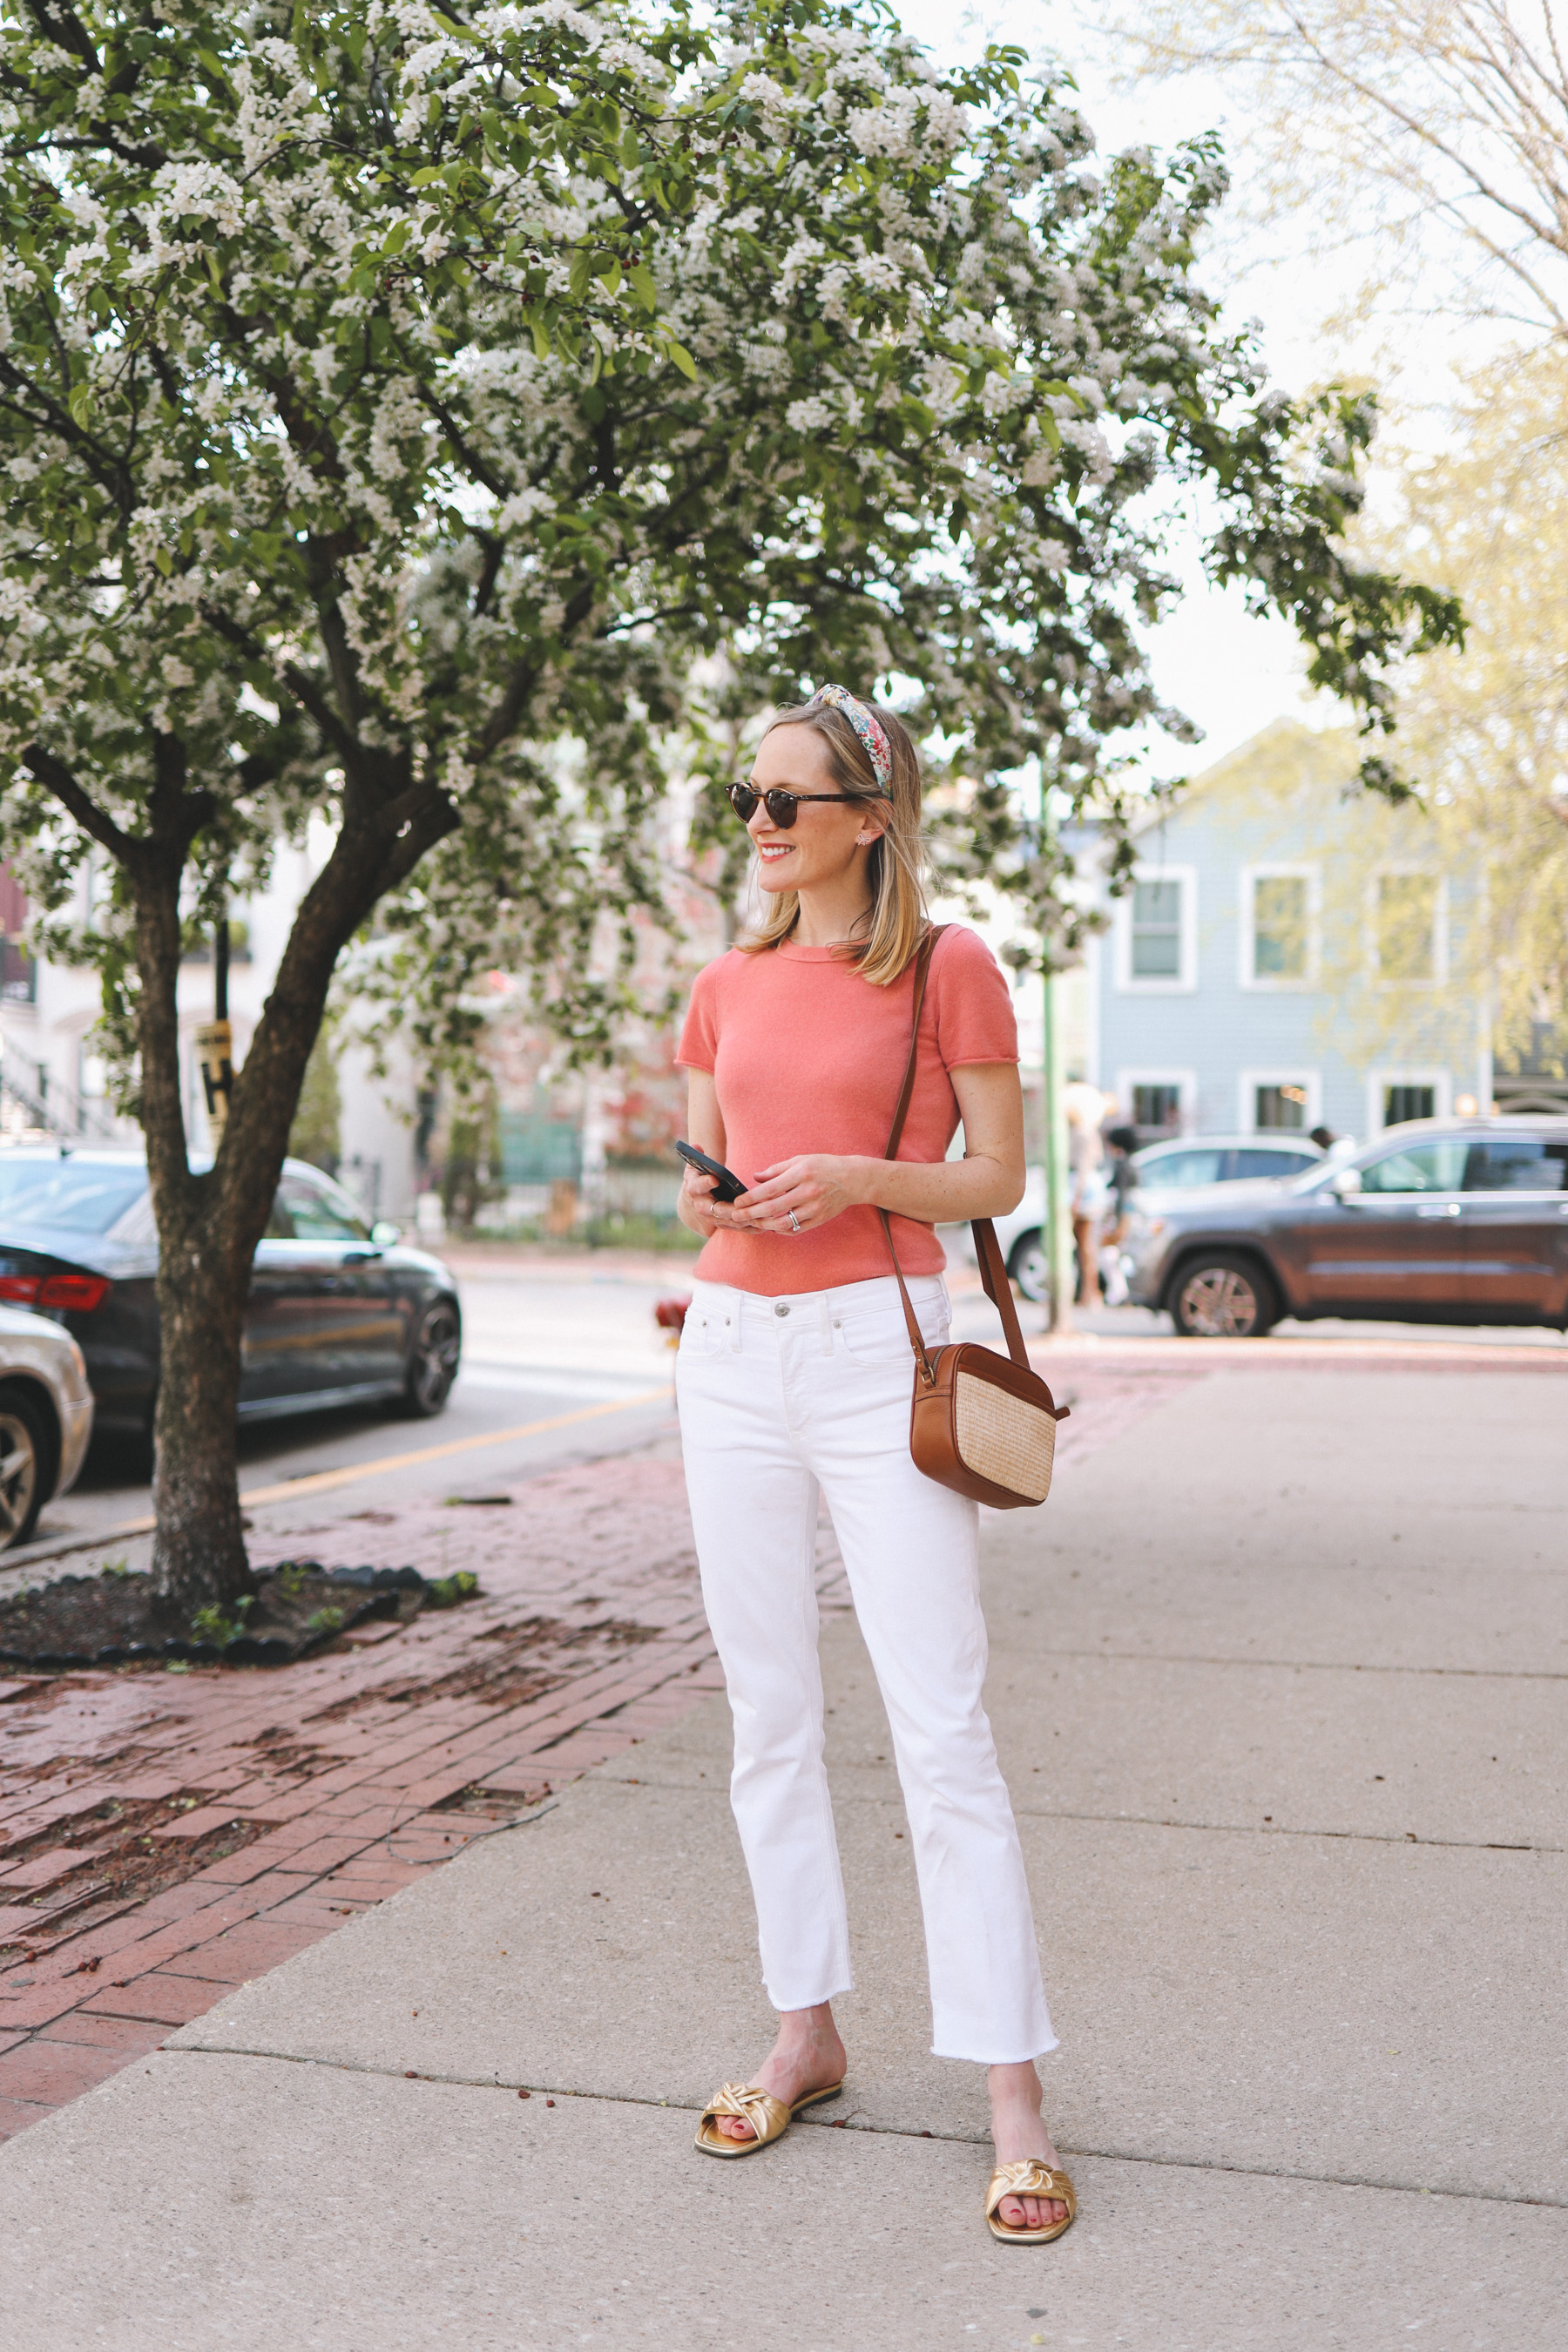 New Spring Outfits from J.Crew